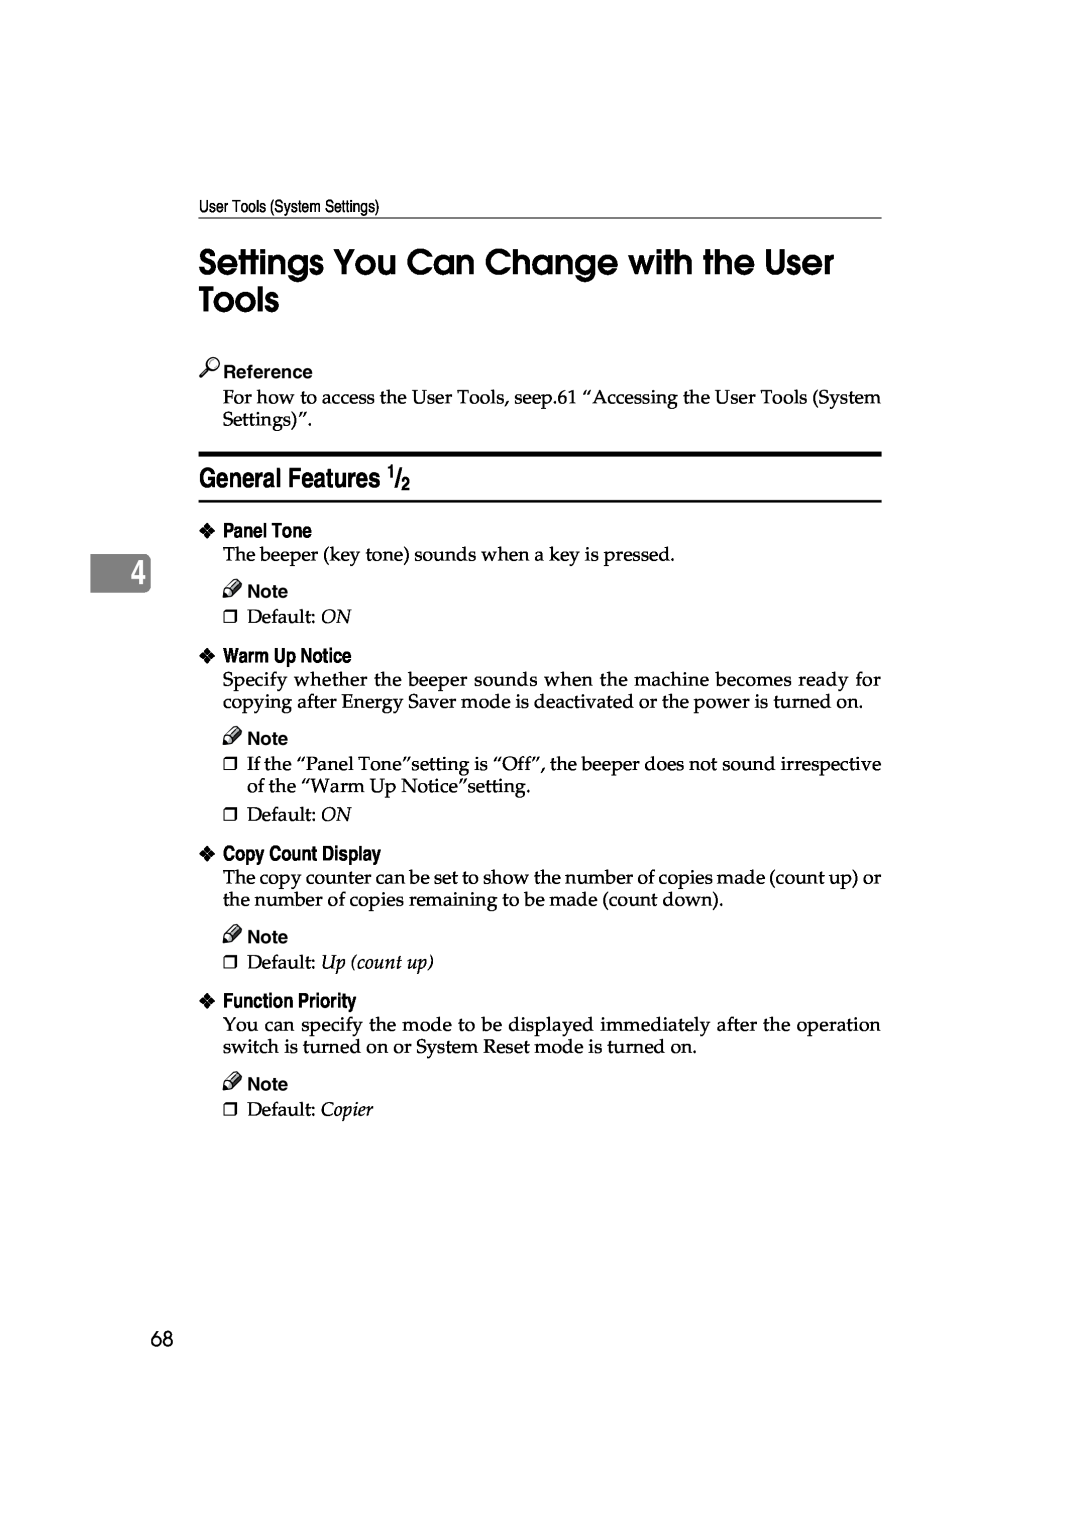 Lanier 5627 AG Settings You Can Change with the User Tools, General Features 1/2, Panel Tone, Warm Up Notice, Reference 